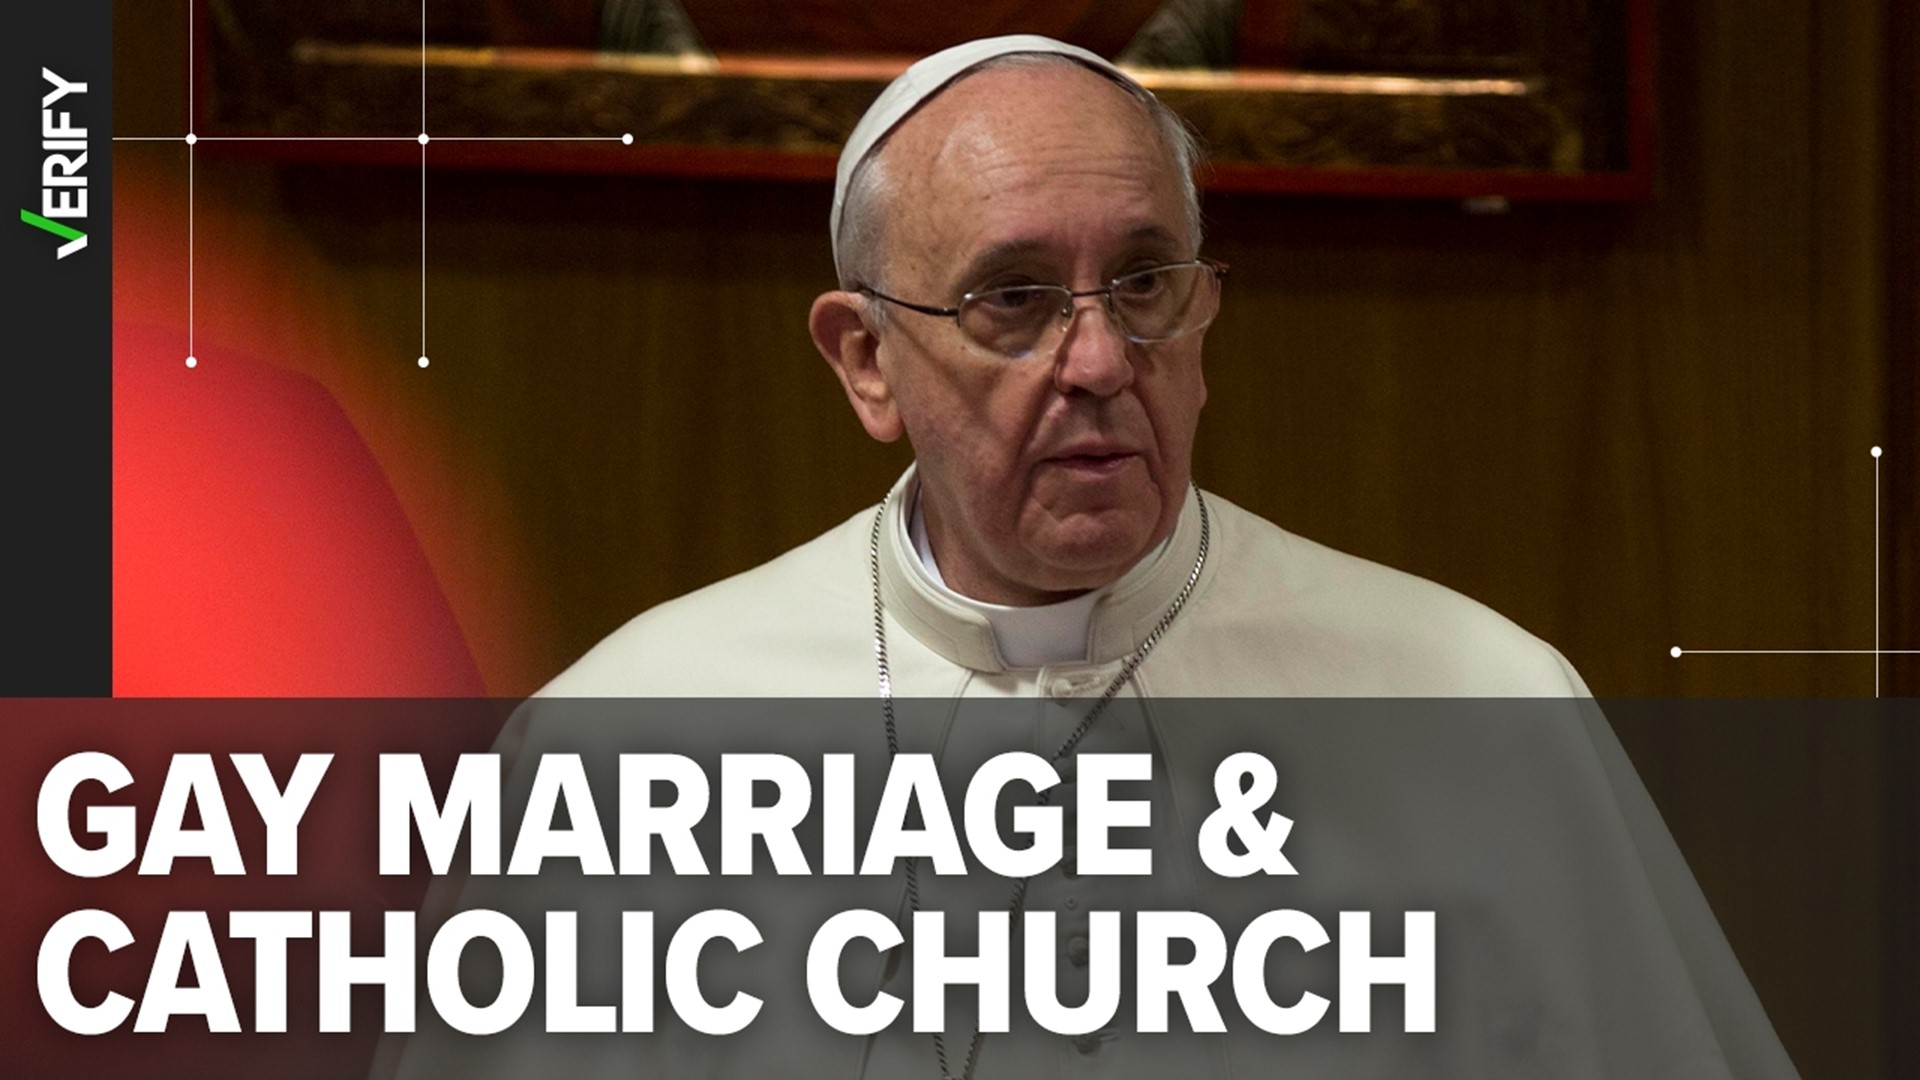 Pope Francis has approved allowing Catholic priests to bless same-sex couples, but the Catholic Church still affirms that marriage is between a man and a woman.